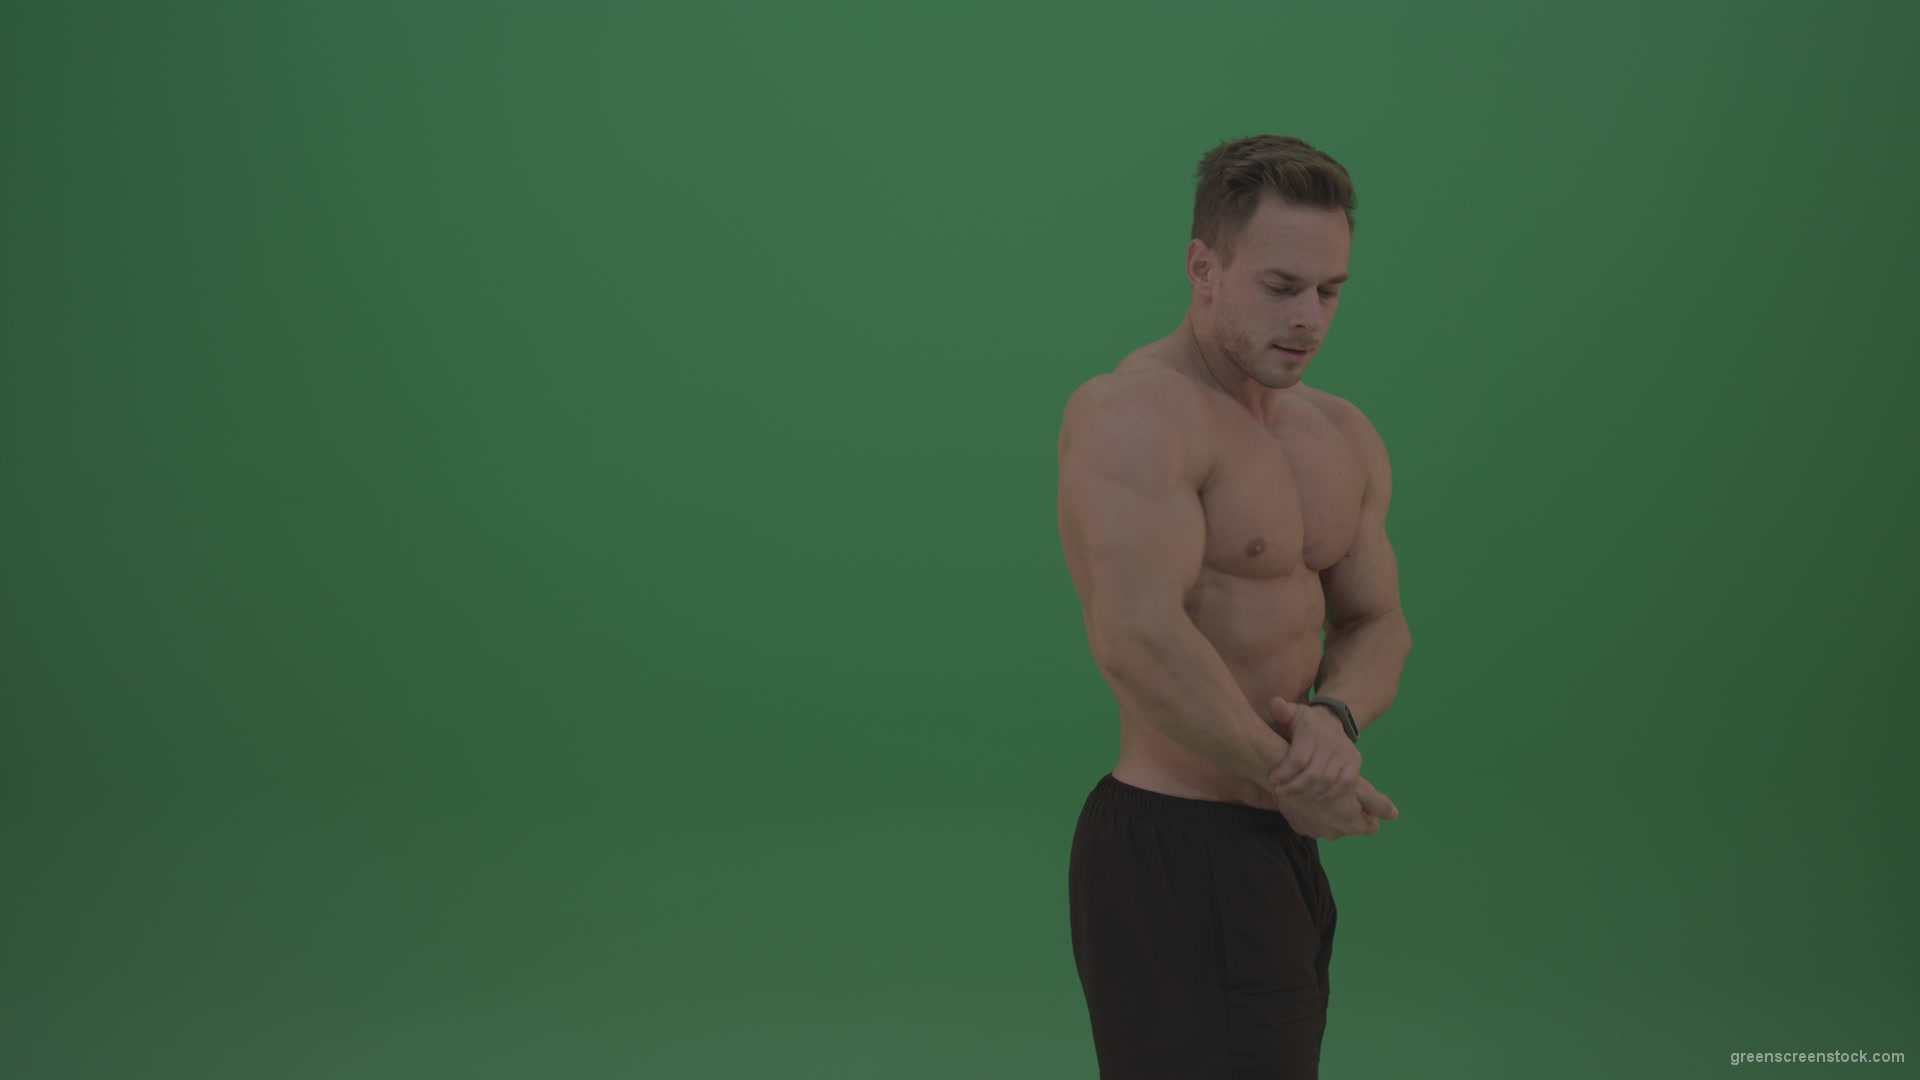 Green-Screen-Blone_Bodybuilder_Demonstrating_Front_Double_Biceps_And_Lateral_Spread_Positions_On_Green_Screen_Wall_Background_008 Green Screen Stock